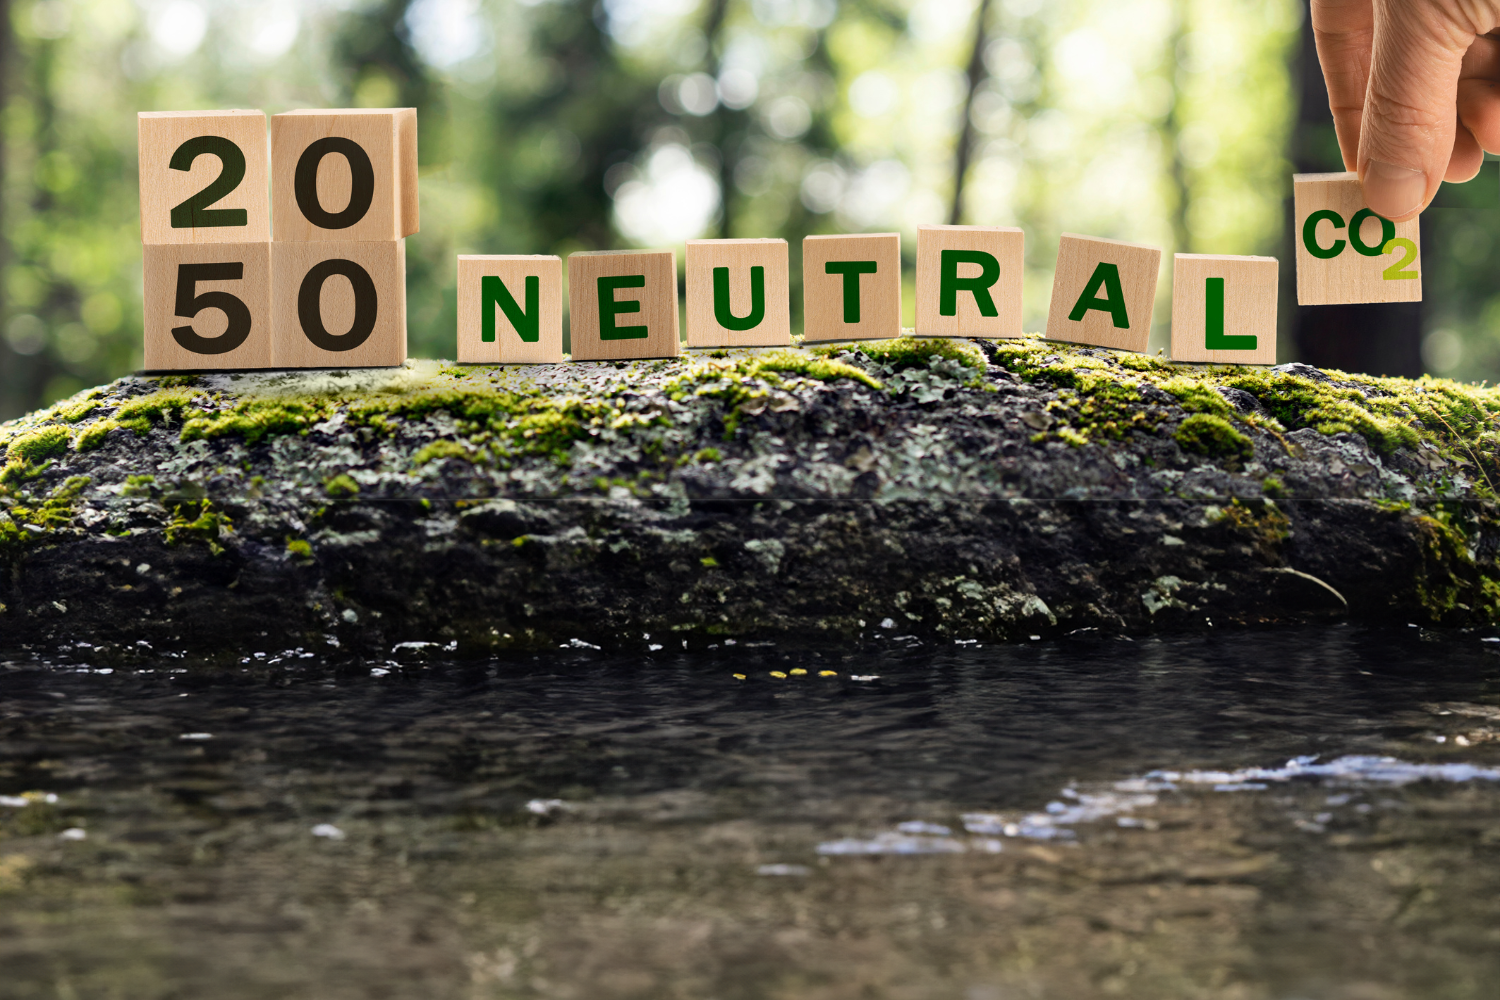 Scrabble letters spell out 2050 NEUTRAL CO2 on a log in nature, AI generative fill has extended the foreground to include a stream